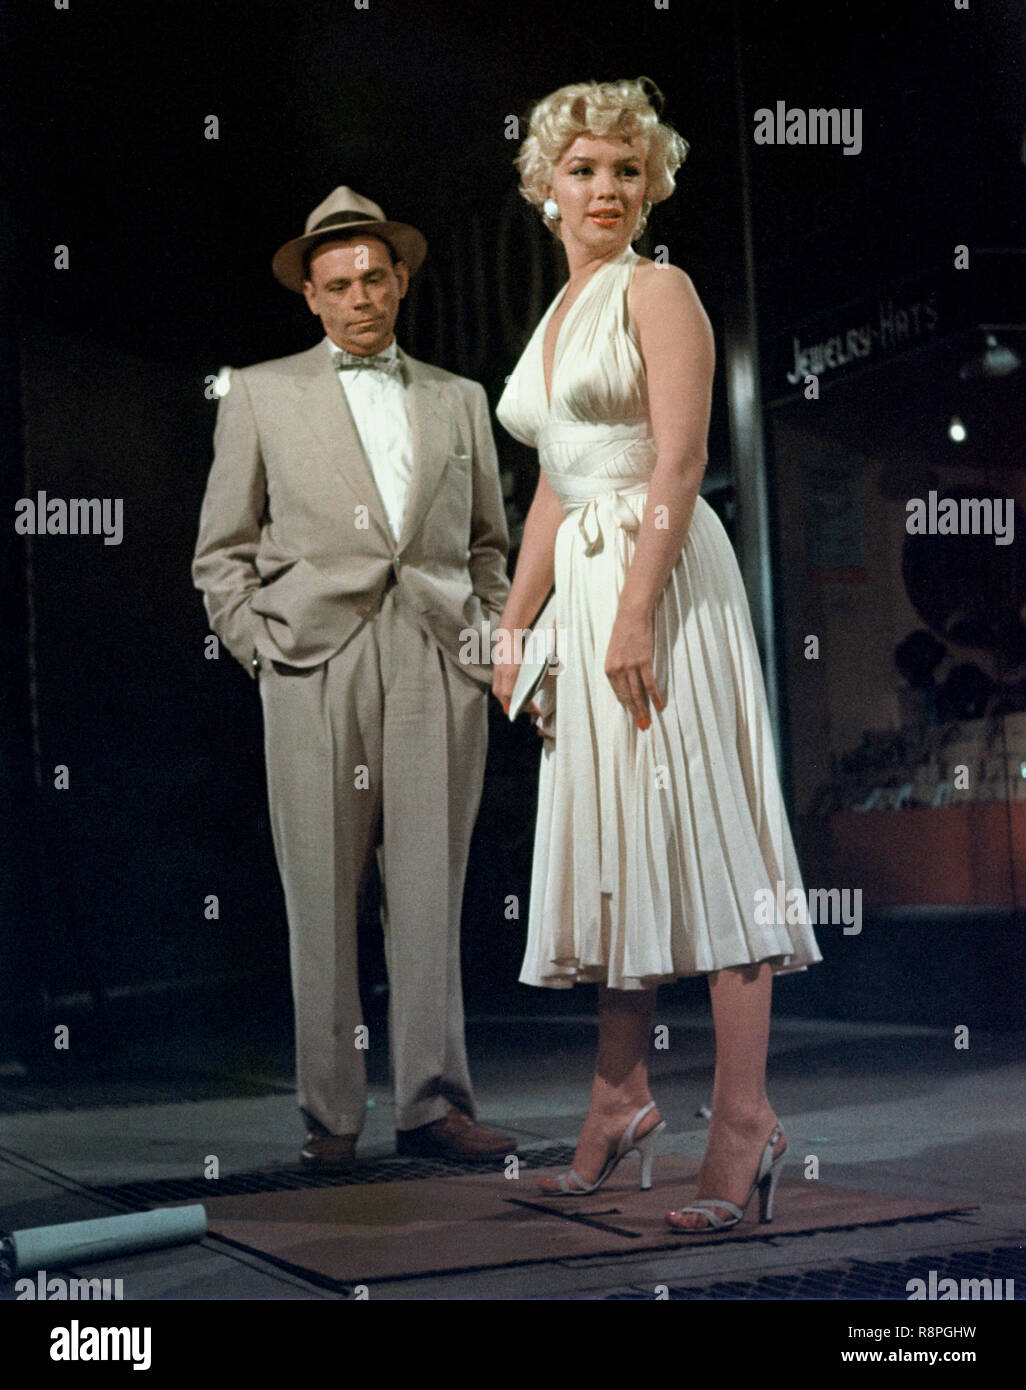 Tom Ewell, Marilyn Monroe, 'The Seven Year Itch' (1955) 20th Century Fox  File Reference # 33635 578THA Stock Photo